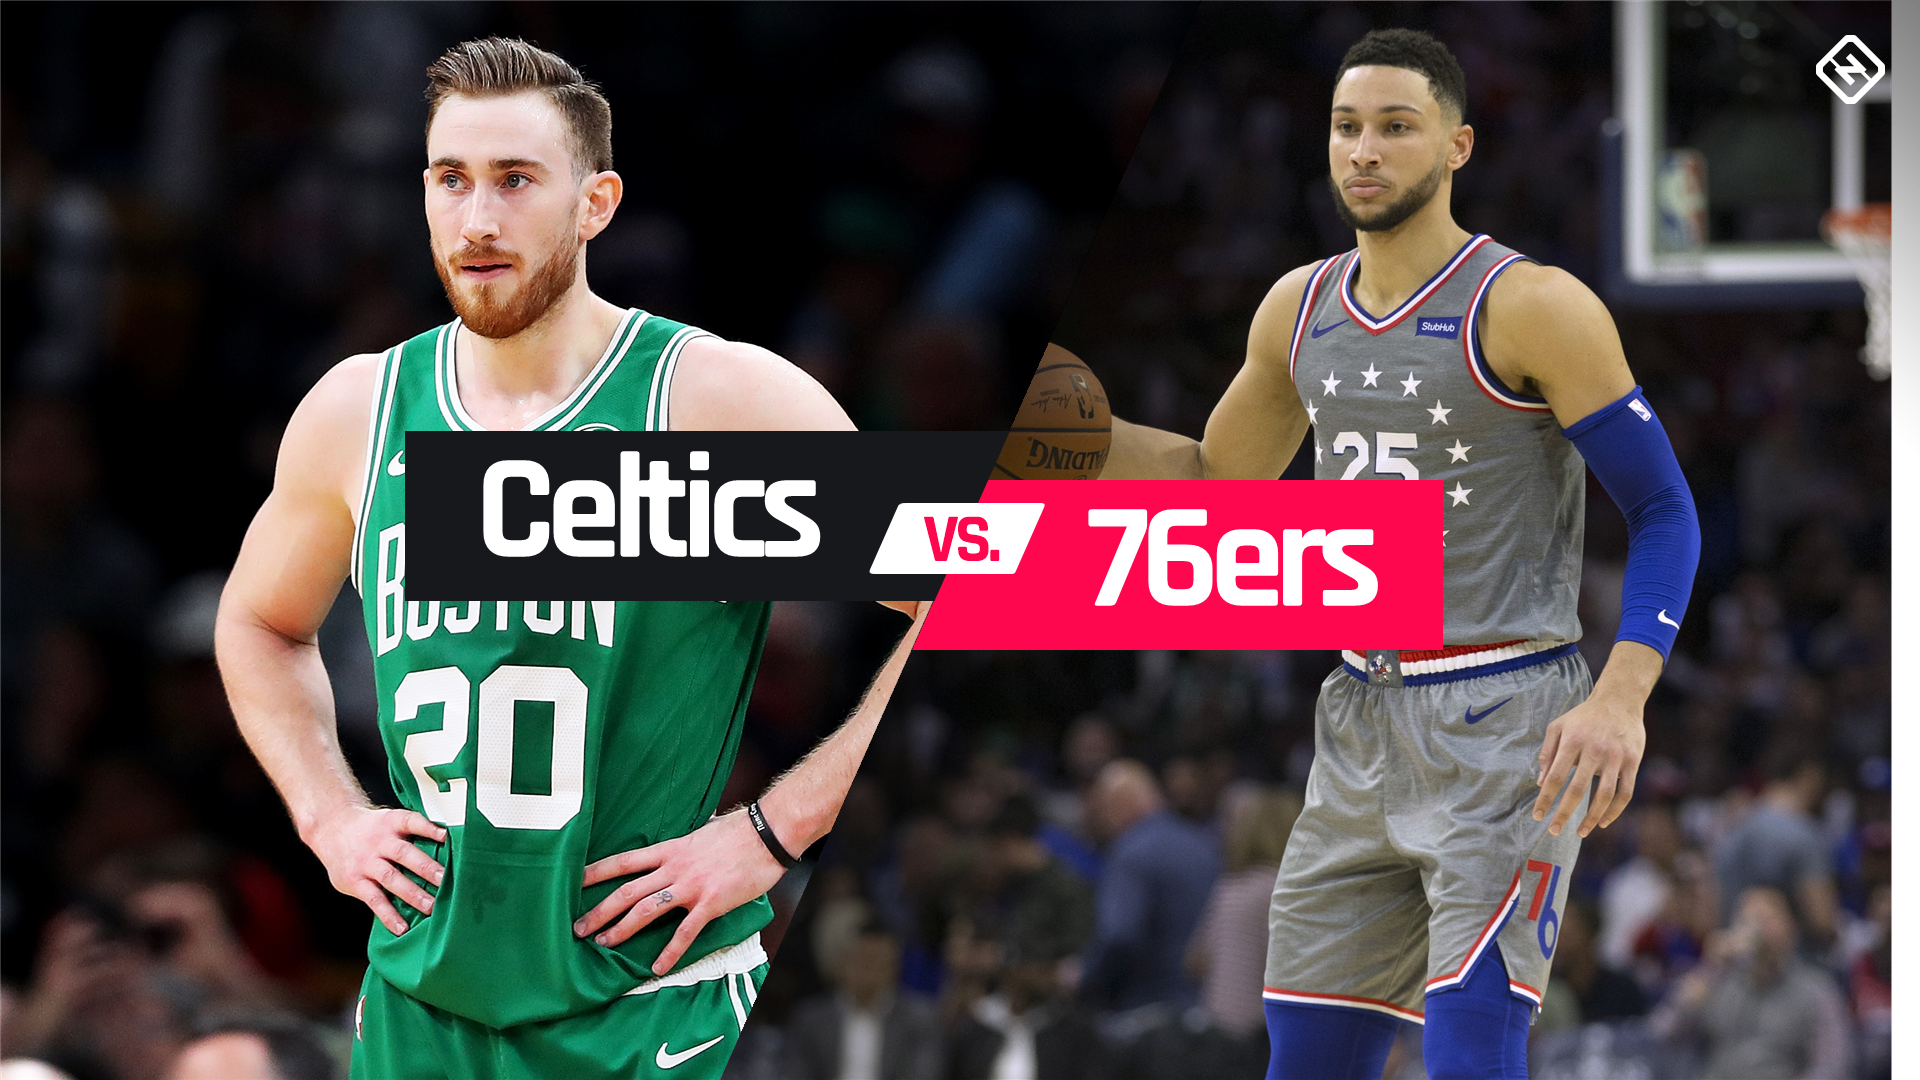 Celtics vs. 76ers: Time, TV channel, how to live stream | NBA | Sporting News